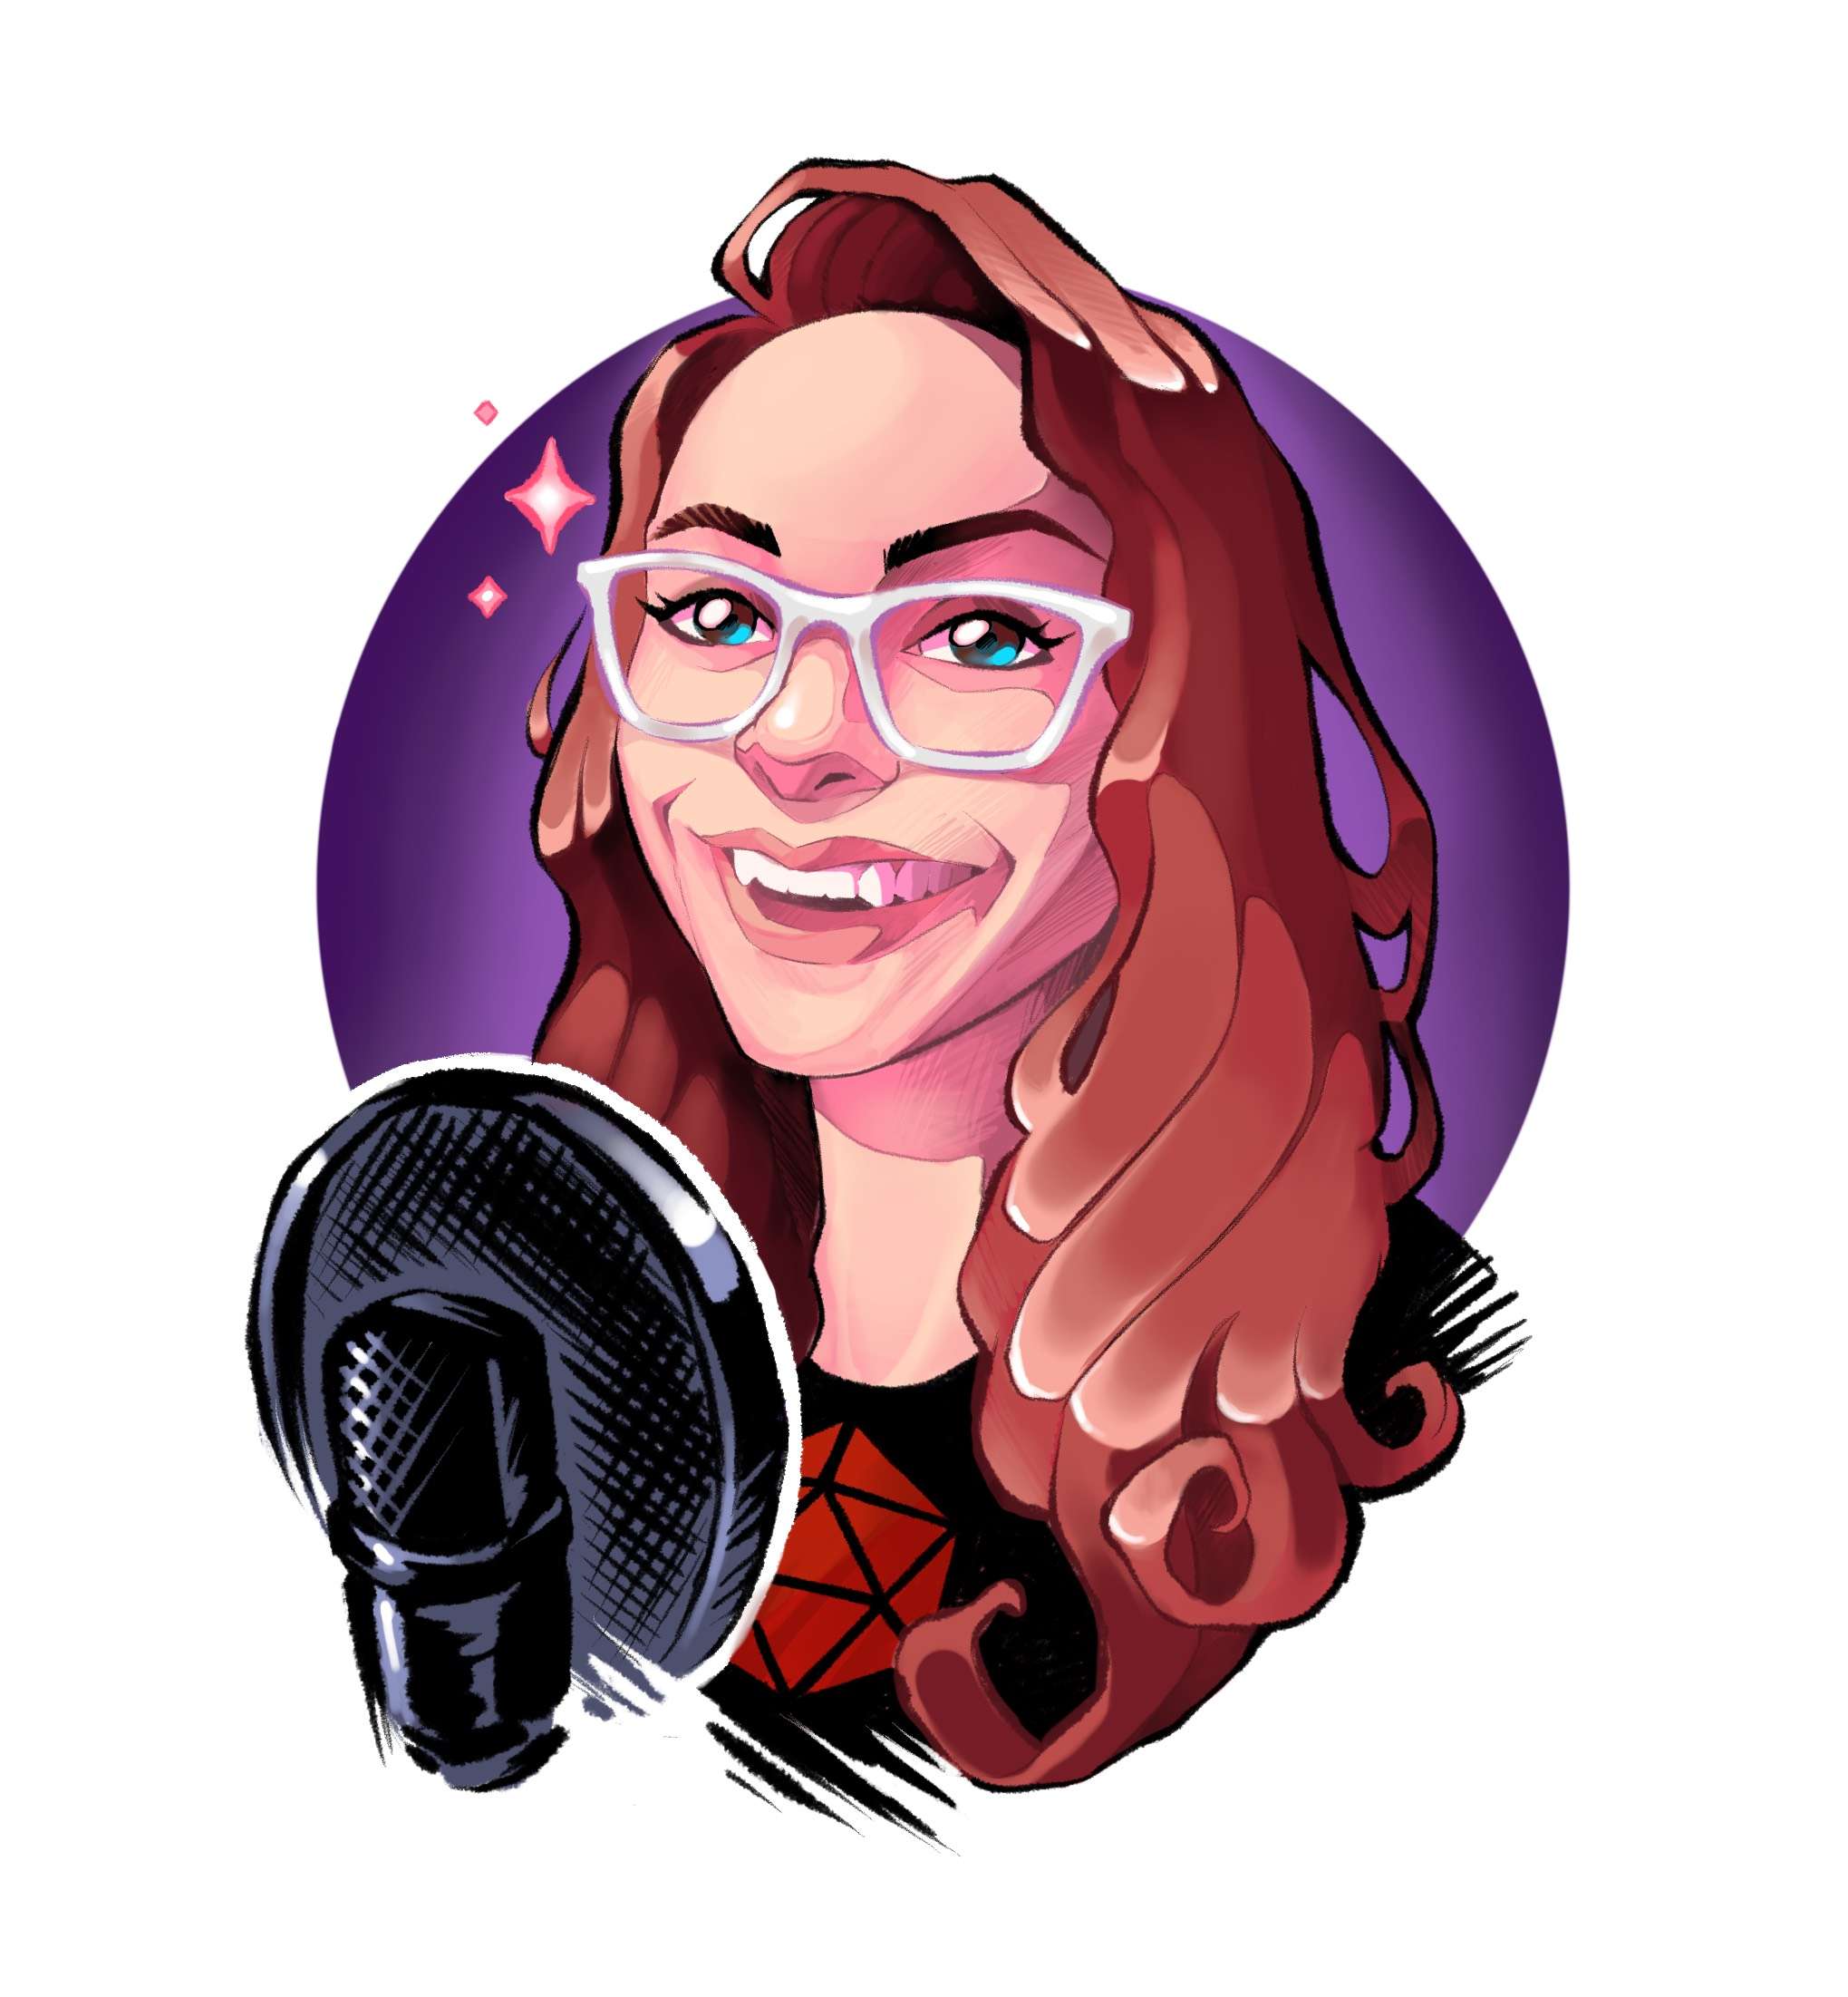 An illustration of the head and shoulders of a white woman with shoulder-length, reddish-brown, wavy hair. She has white glasses, snaggleteeth, and a black shirt with a red d20 on it. A microphone with a pop filter in the bottom-left corner.